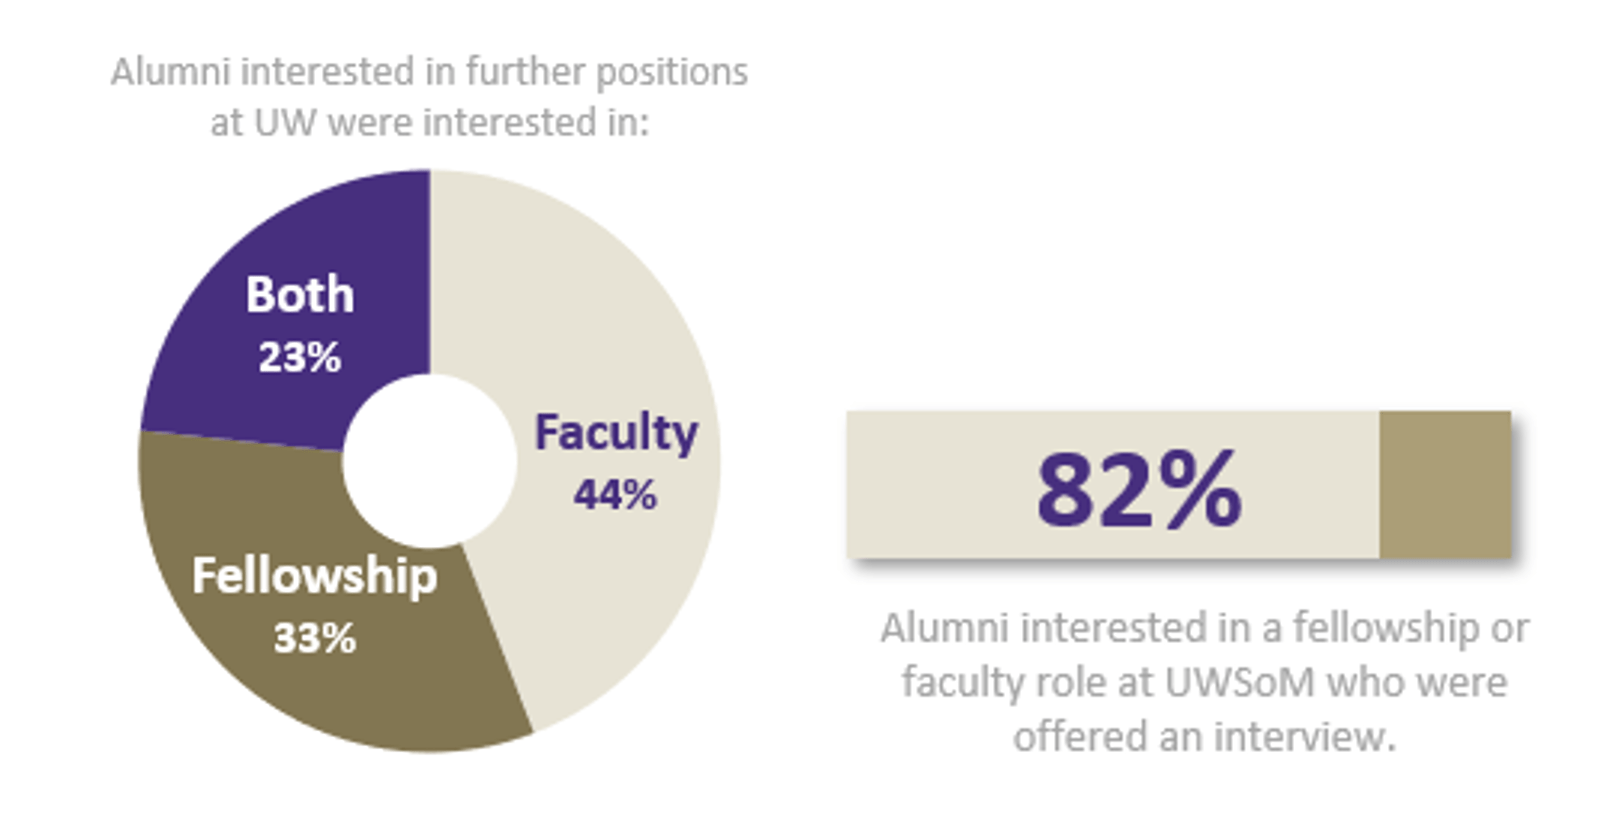 Alumni interested in further positions at UW were interested in: Both 23%; Faculty 44%, Fellowship 33% Alumni interested in a fellowship or faculty role at UWSoM who were offered an interview: 82%